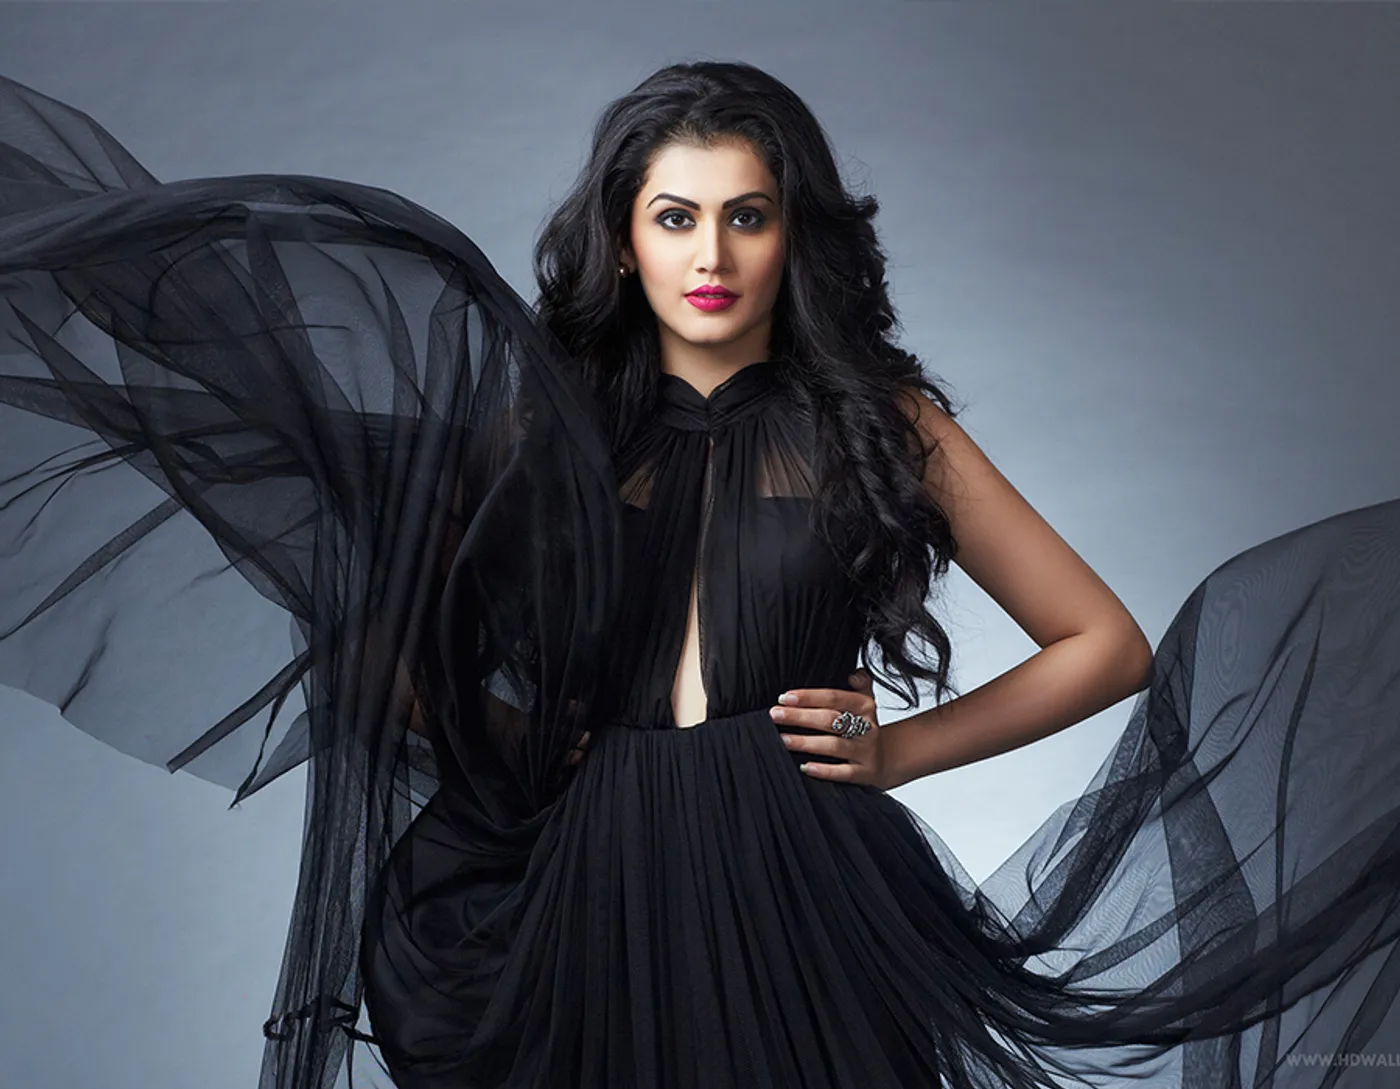 TAAPSEE PANNU LOOKS LIKE A MODERN DAY PRINCESS IN THIS PHOTOSHOOT